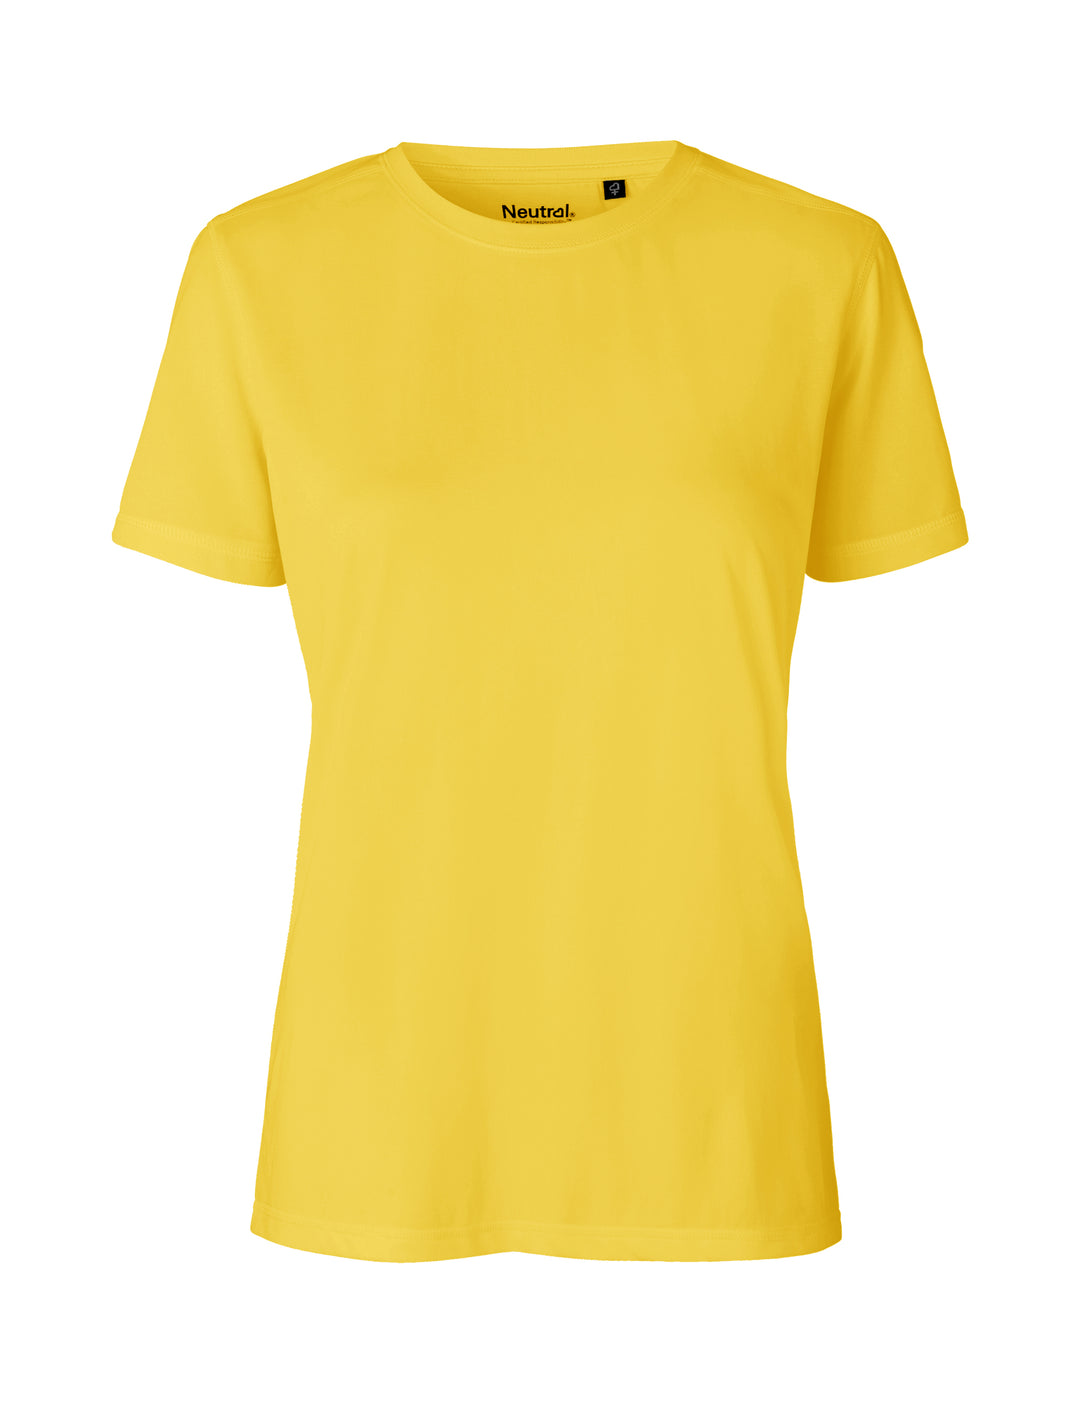 Ladies Recycled Performance T-shirt